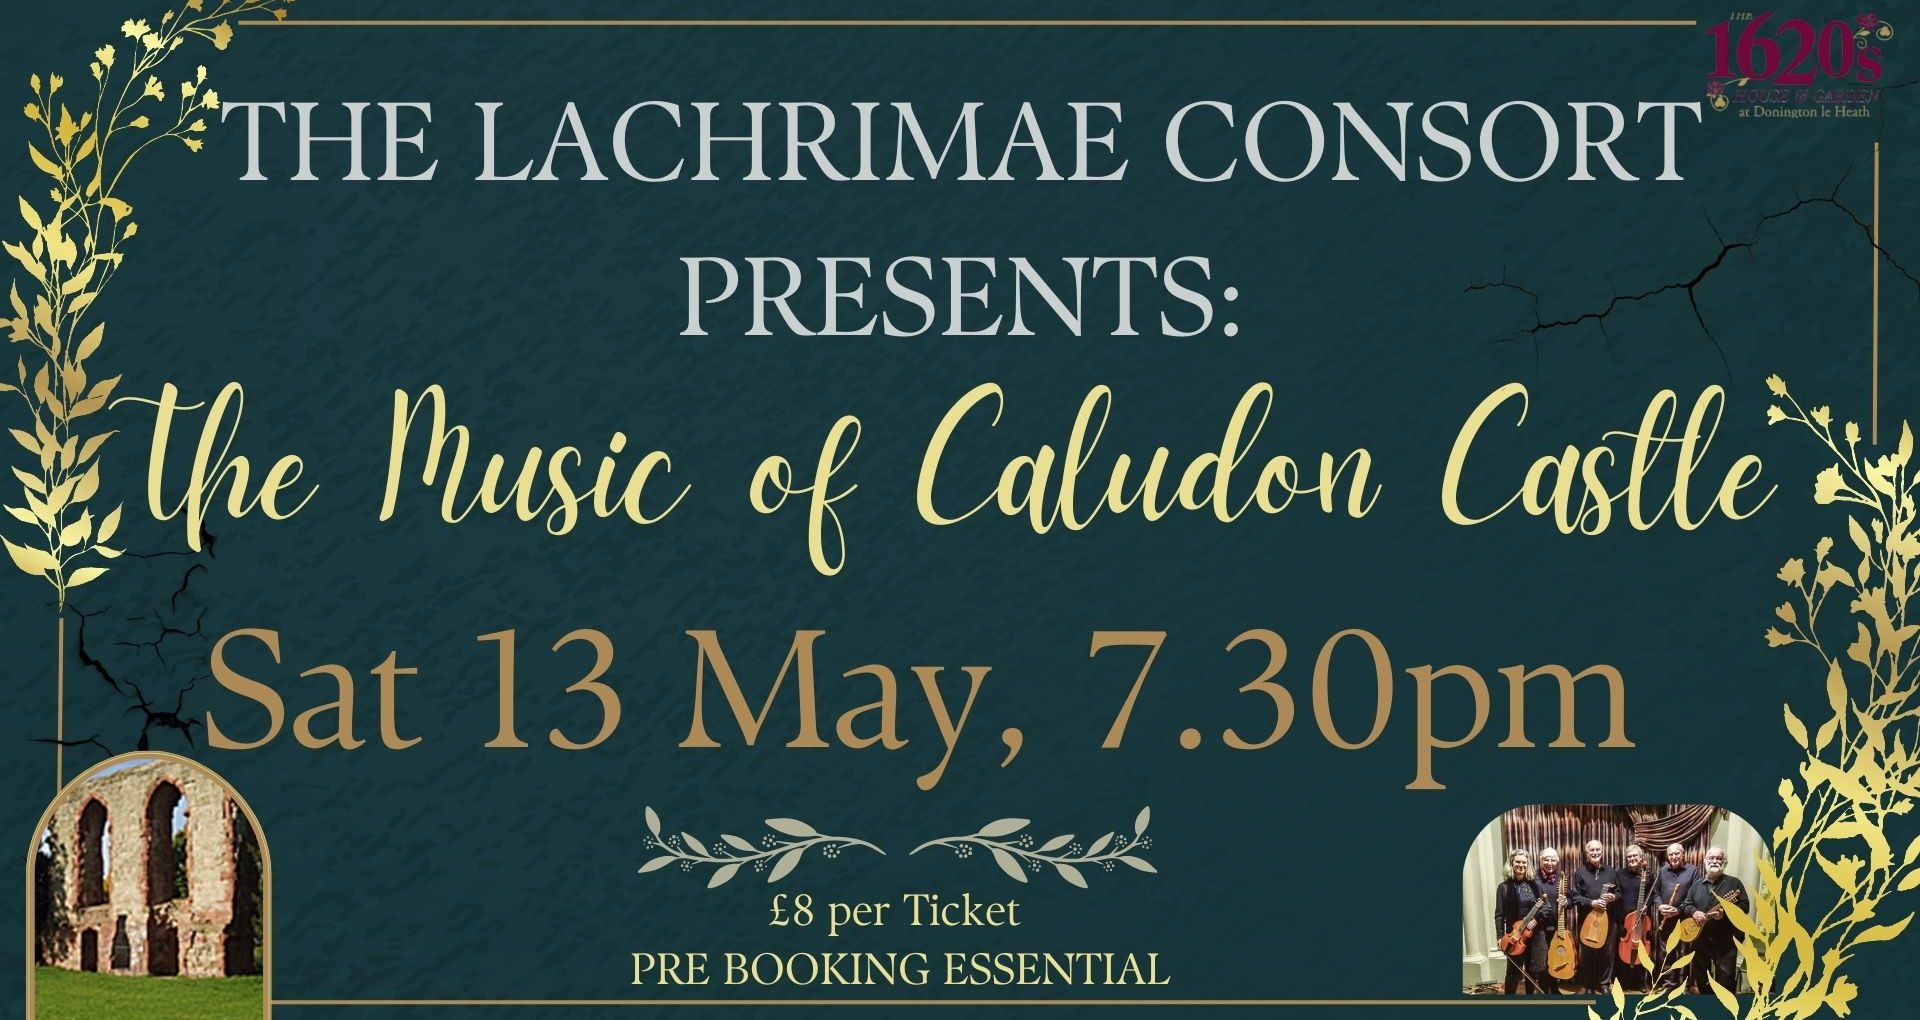 Lachrimae Consort:  The Music of Caludon Castle